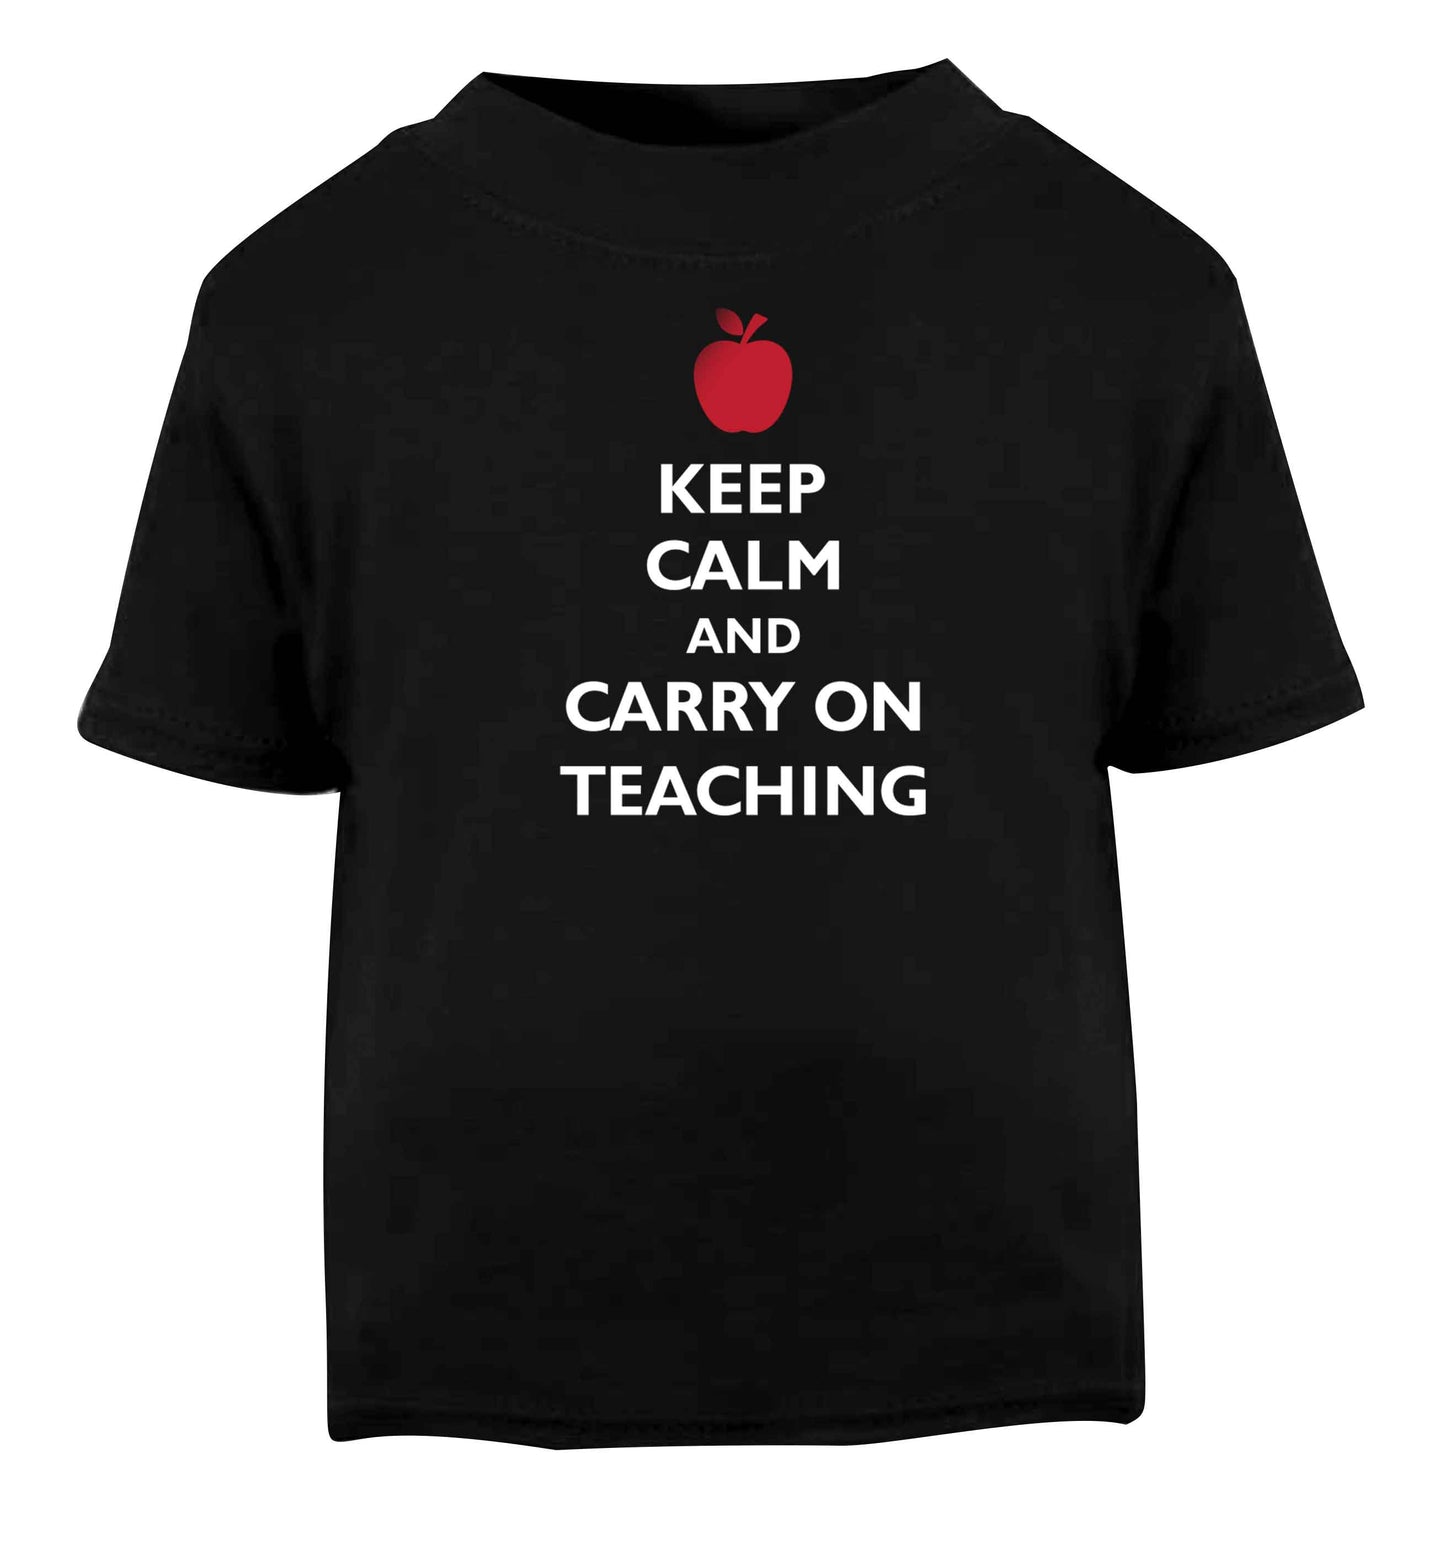 Keep calm and carry on teaching Black baby toddler Tshirt 2 years